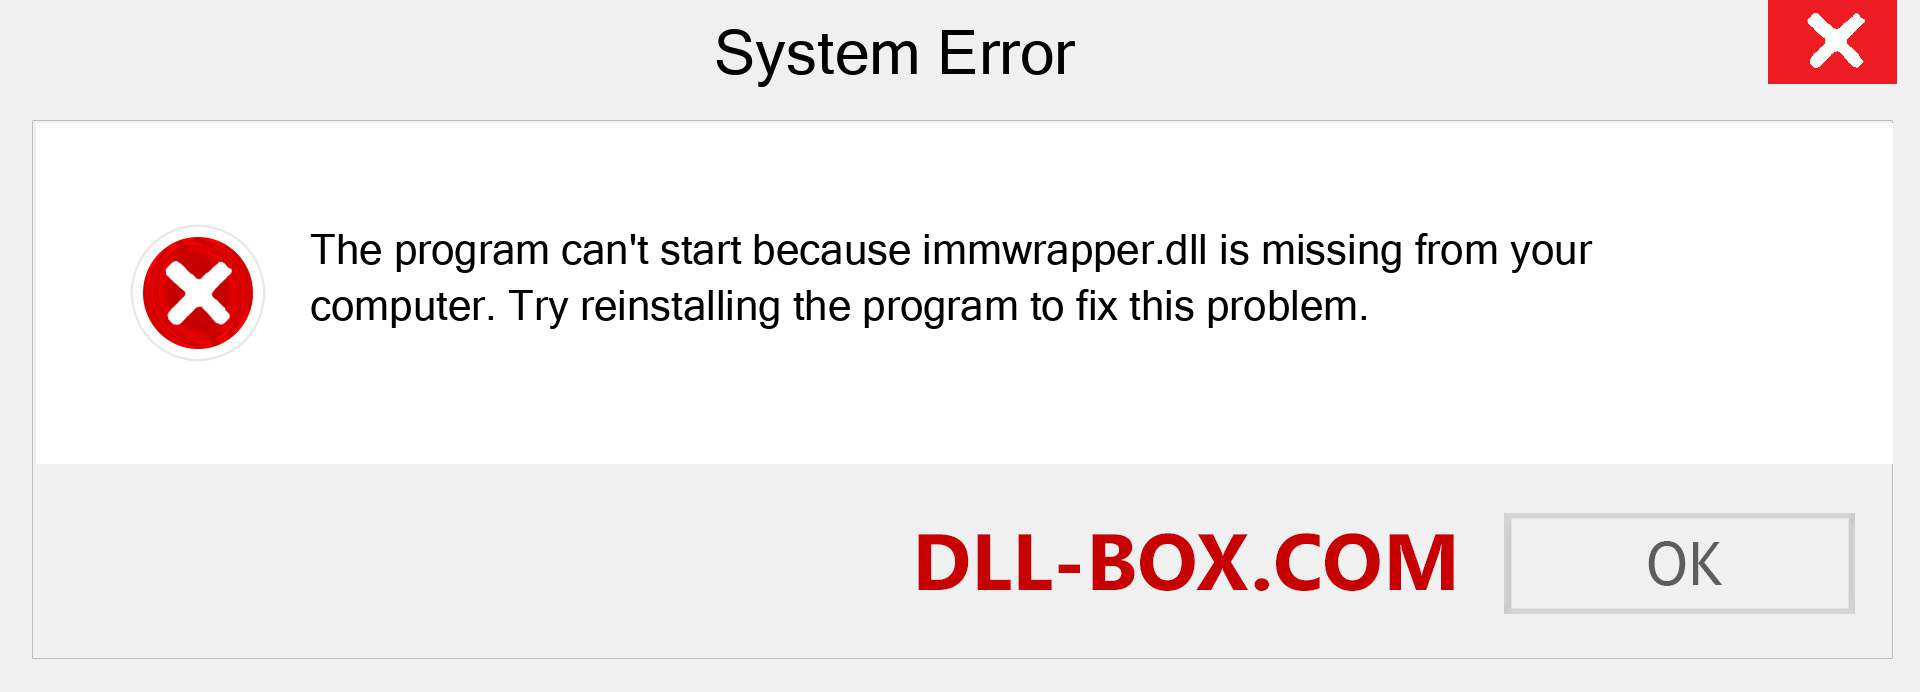  immwrapper.dll file is missing?. Download for Windows 7, 8, 10 - Fix  immwrapper dll Missing Error on Windows, photos, images